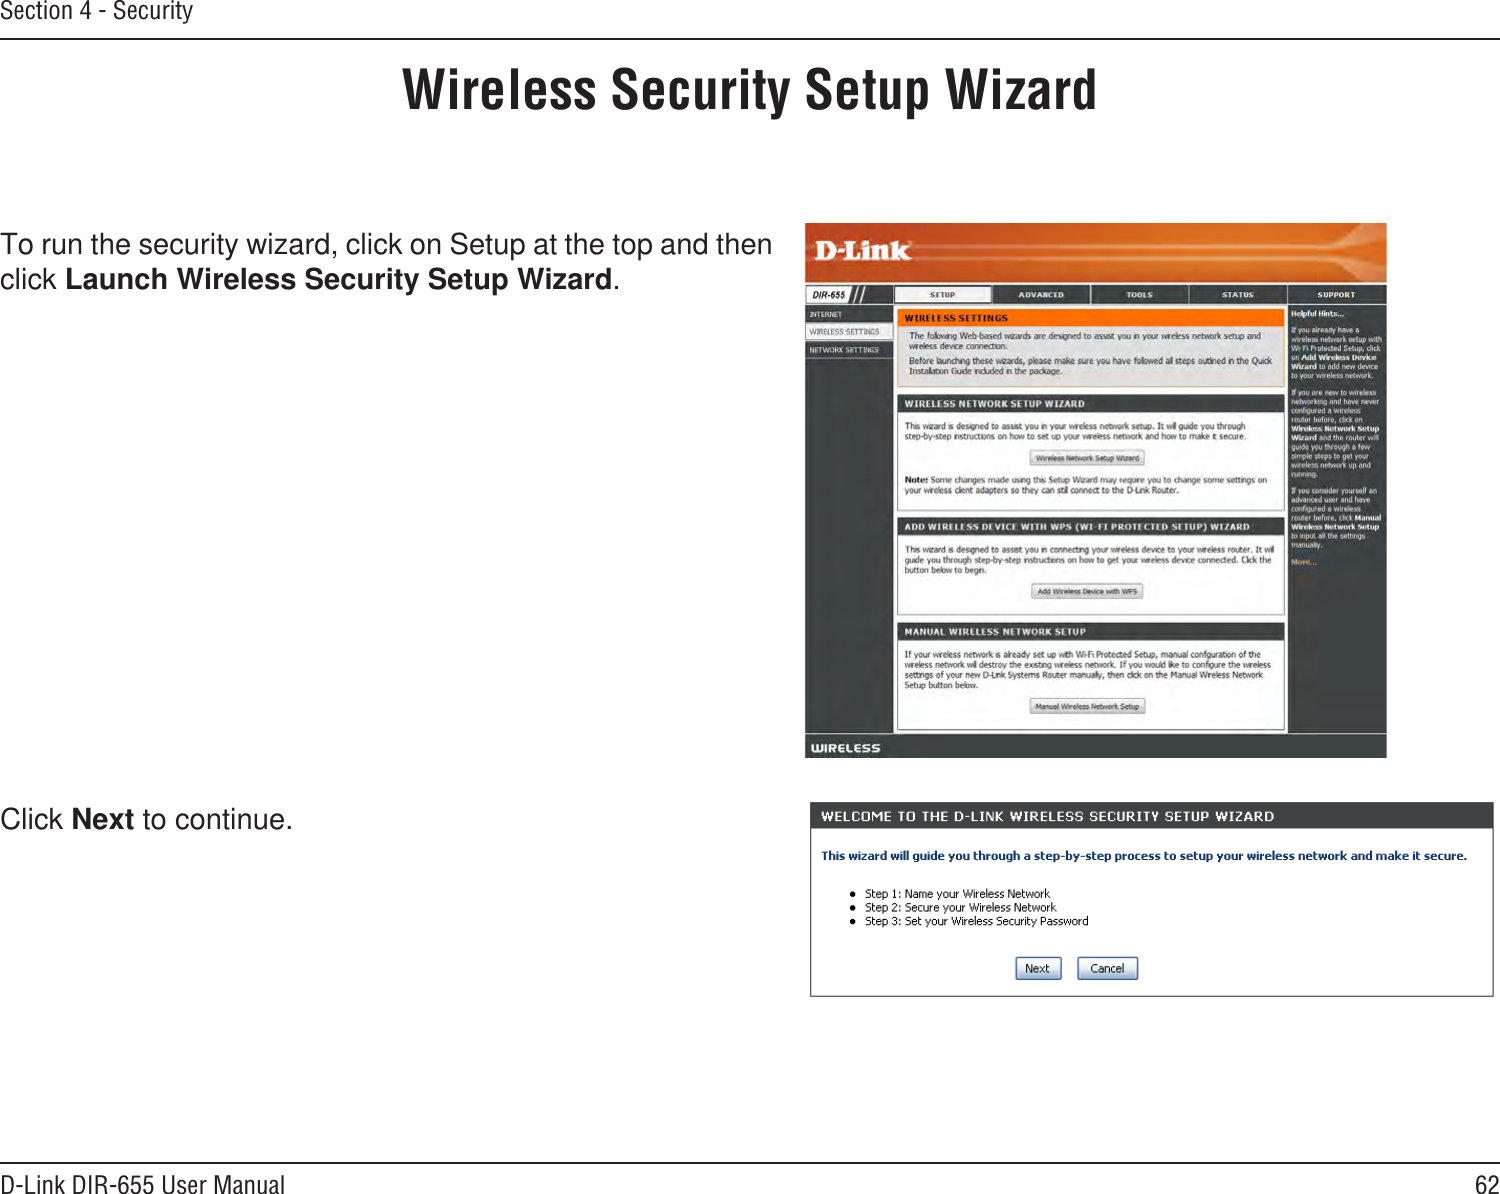 62D-Link DIR-655 User ManualSection 4 - SecurityWireless Security Setup WizardTo run the security wizard, click on Setup at the top and then click Launch Wireless Security Setup Wizard.Click Next to continue.